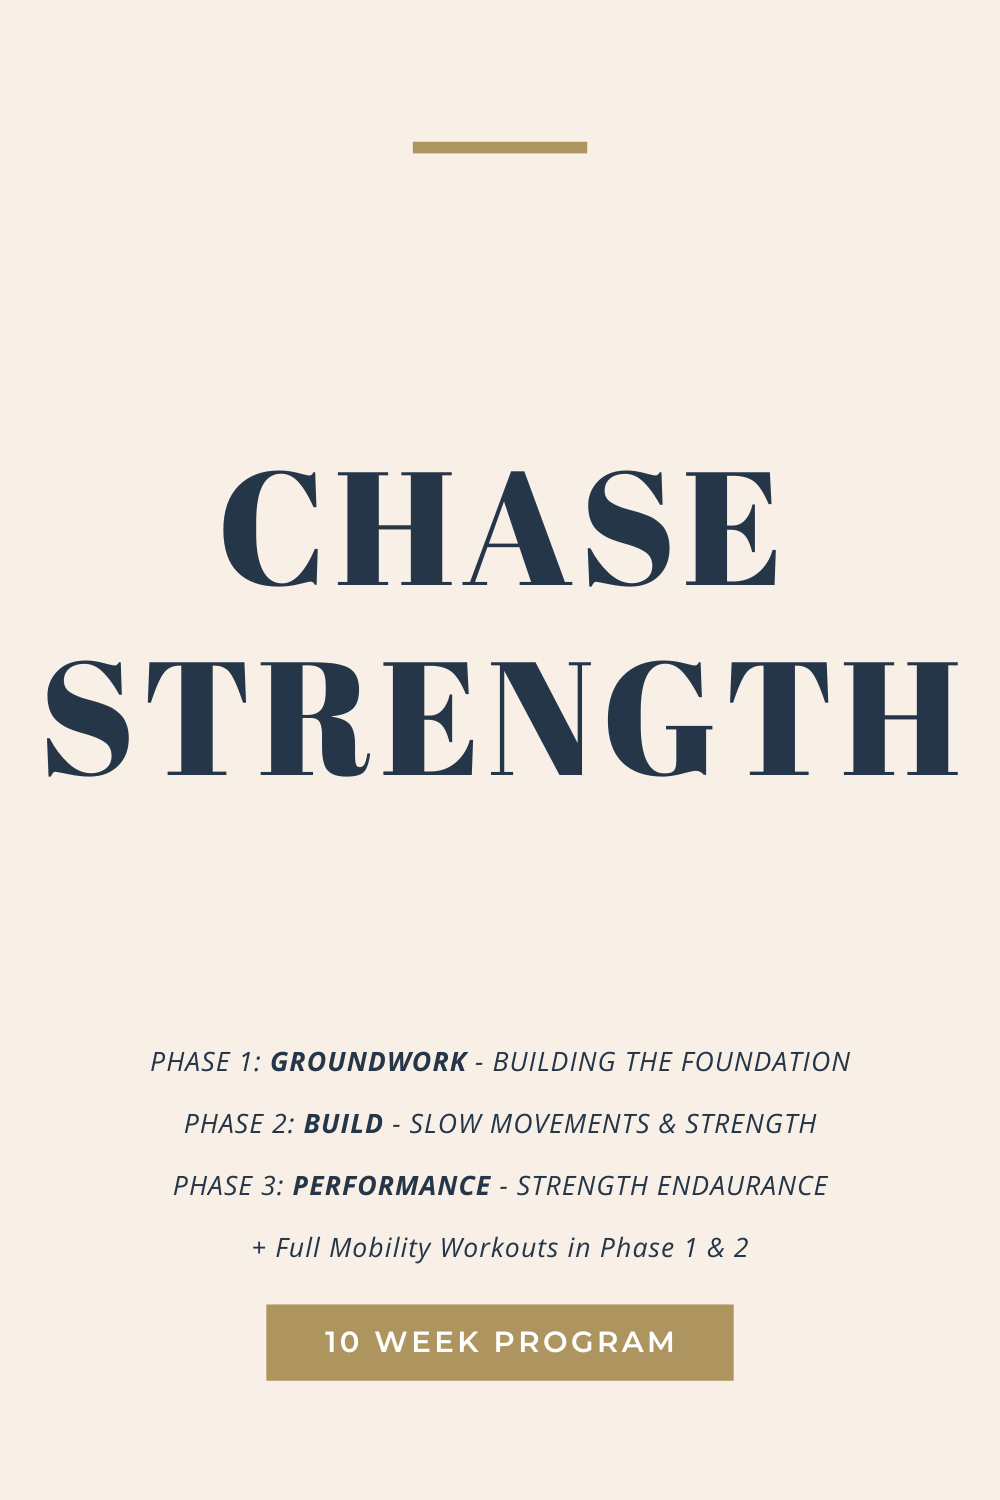 CHASE STRENGTH